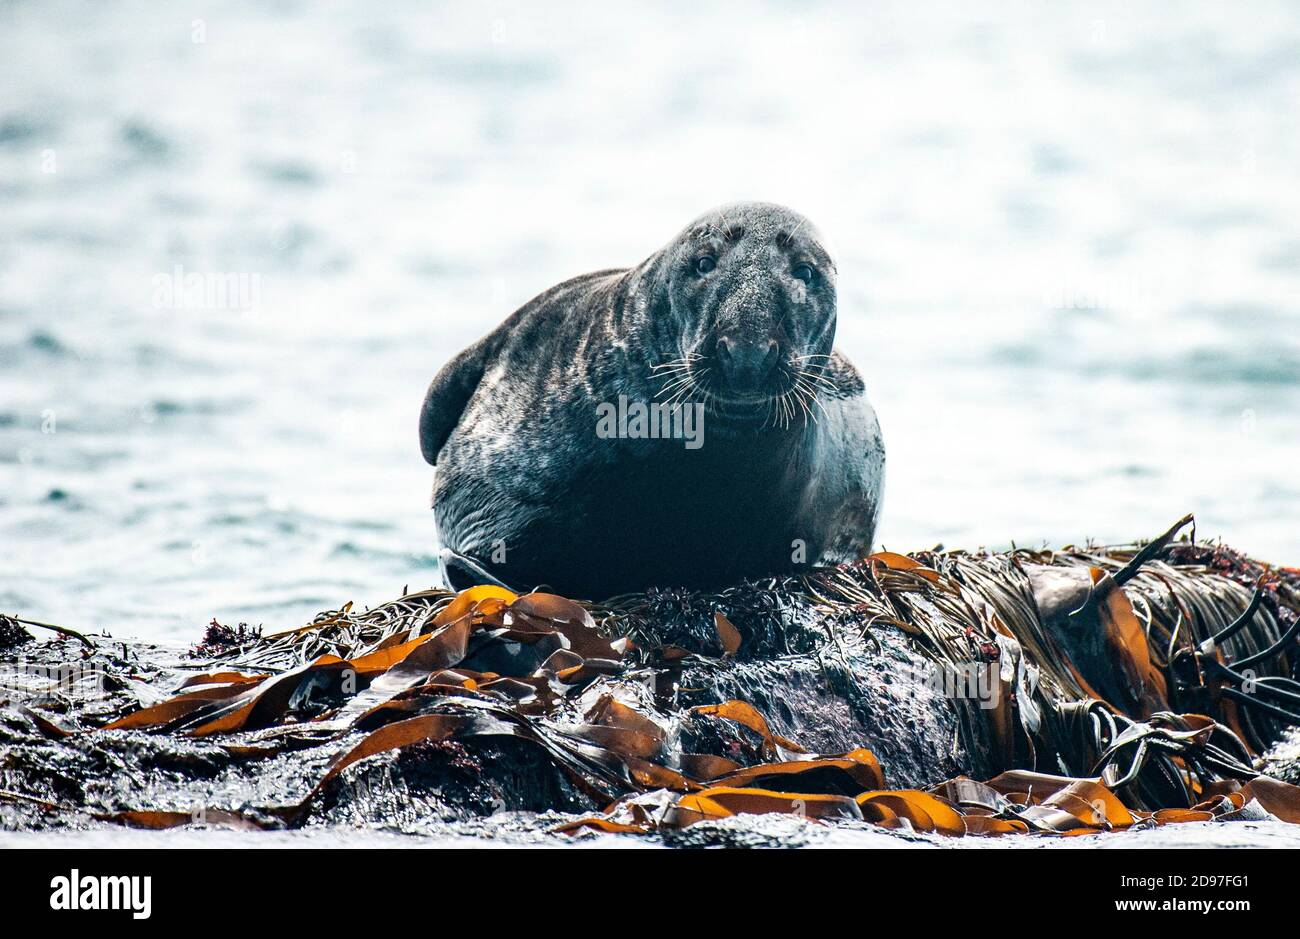 Gray seal (Halichoerus grypus), male in seaweed, 7 Islands Archipelago, Brittany, France Stock Photo